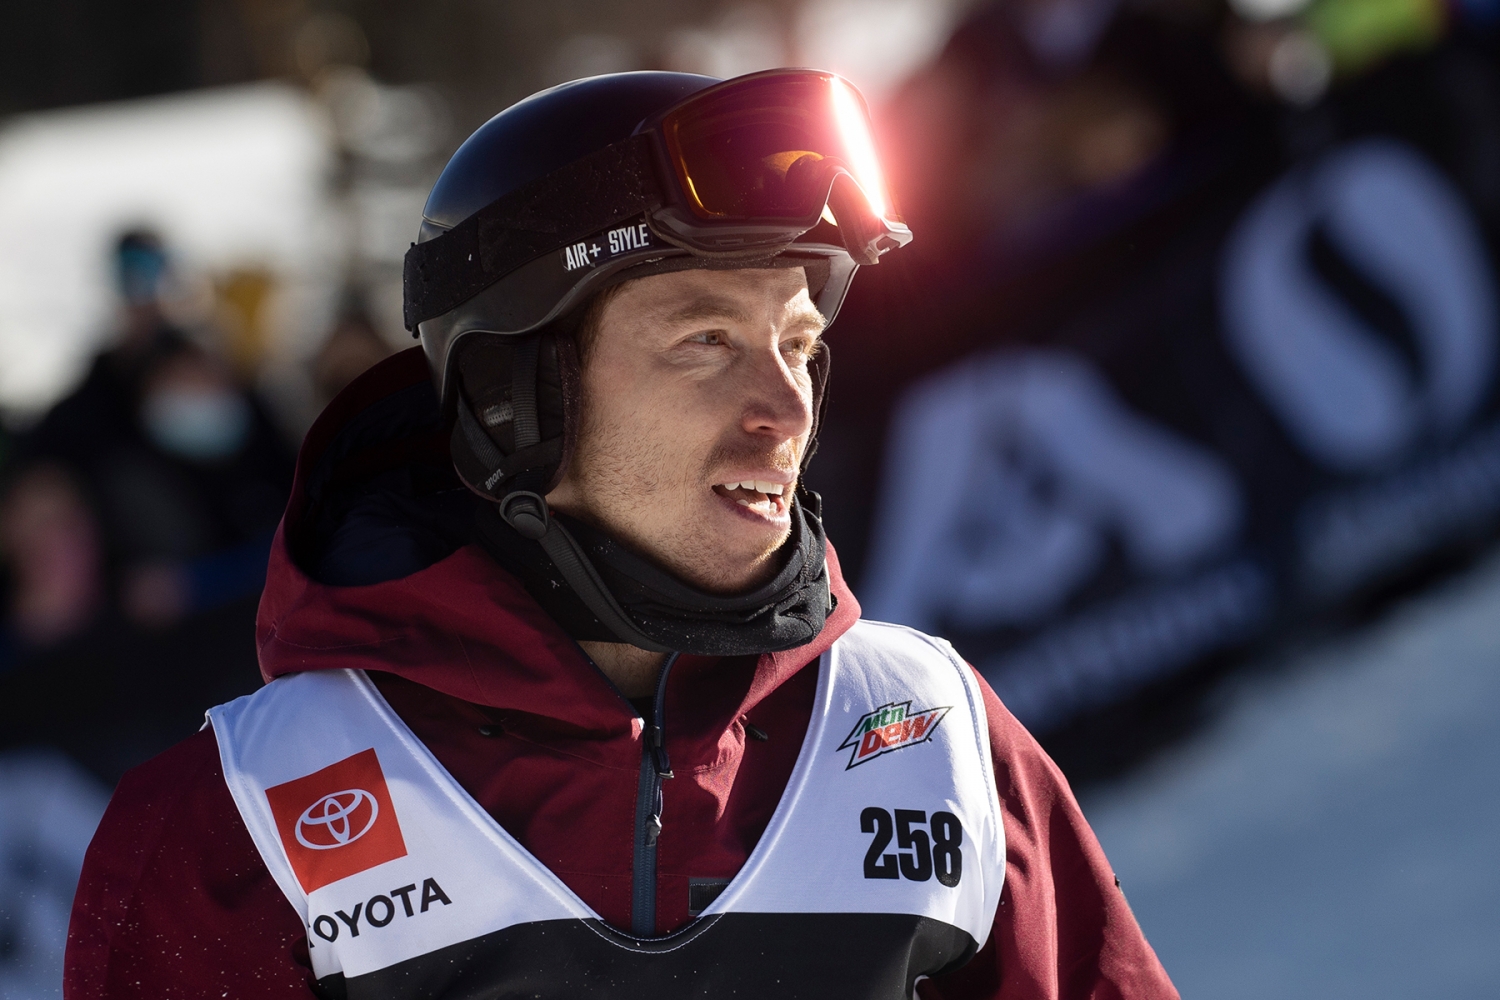 Shaun White, of the United States, after his third run in the snowboarding halfpipe finals, Sunday, Dec. 19, 2021, during the Dew Tour at Copper Mountain, Colo. (AP Photo/Hugh Carey)